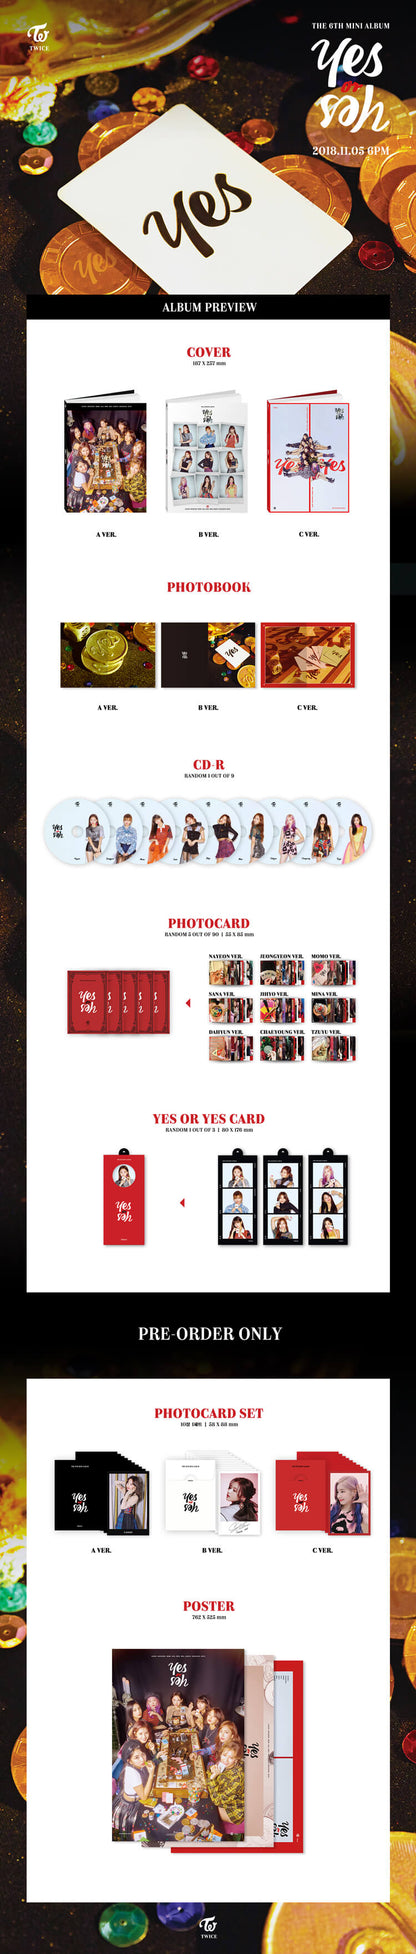 TWICE - YES or YES (6th Mini Album) (3 Versions)